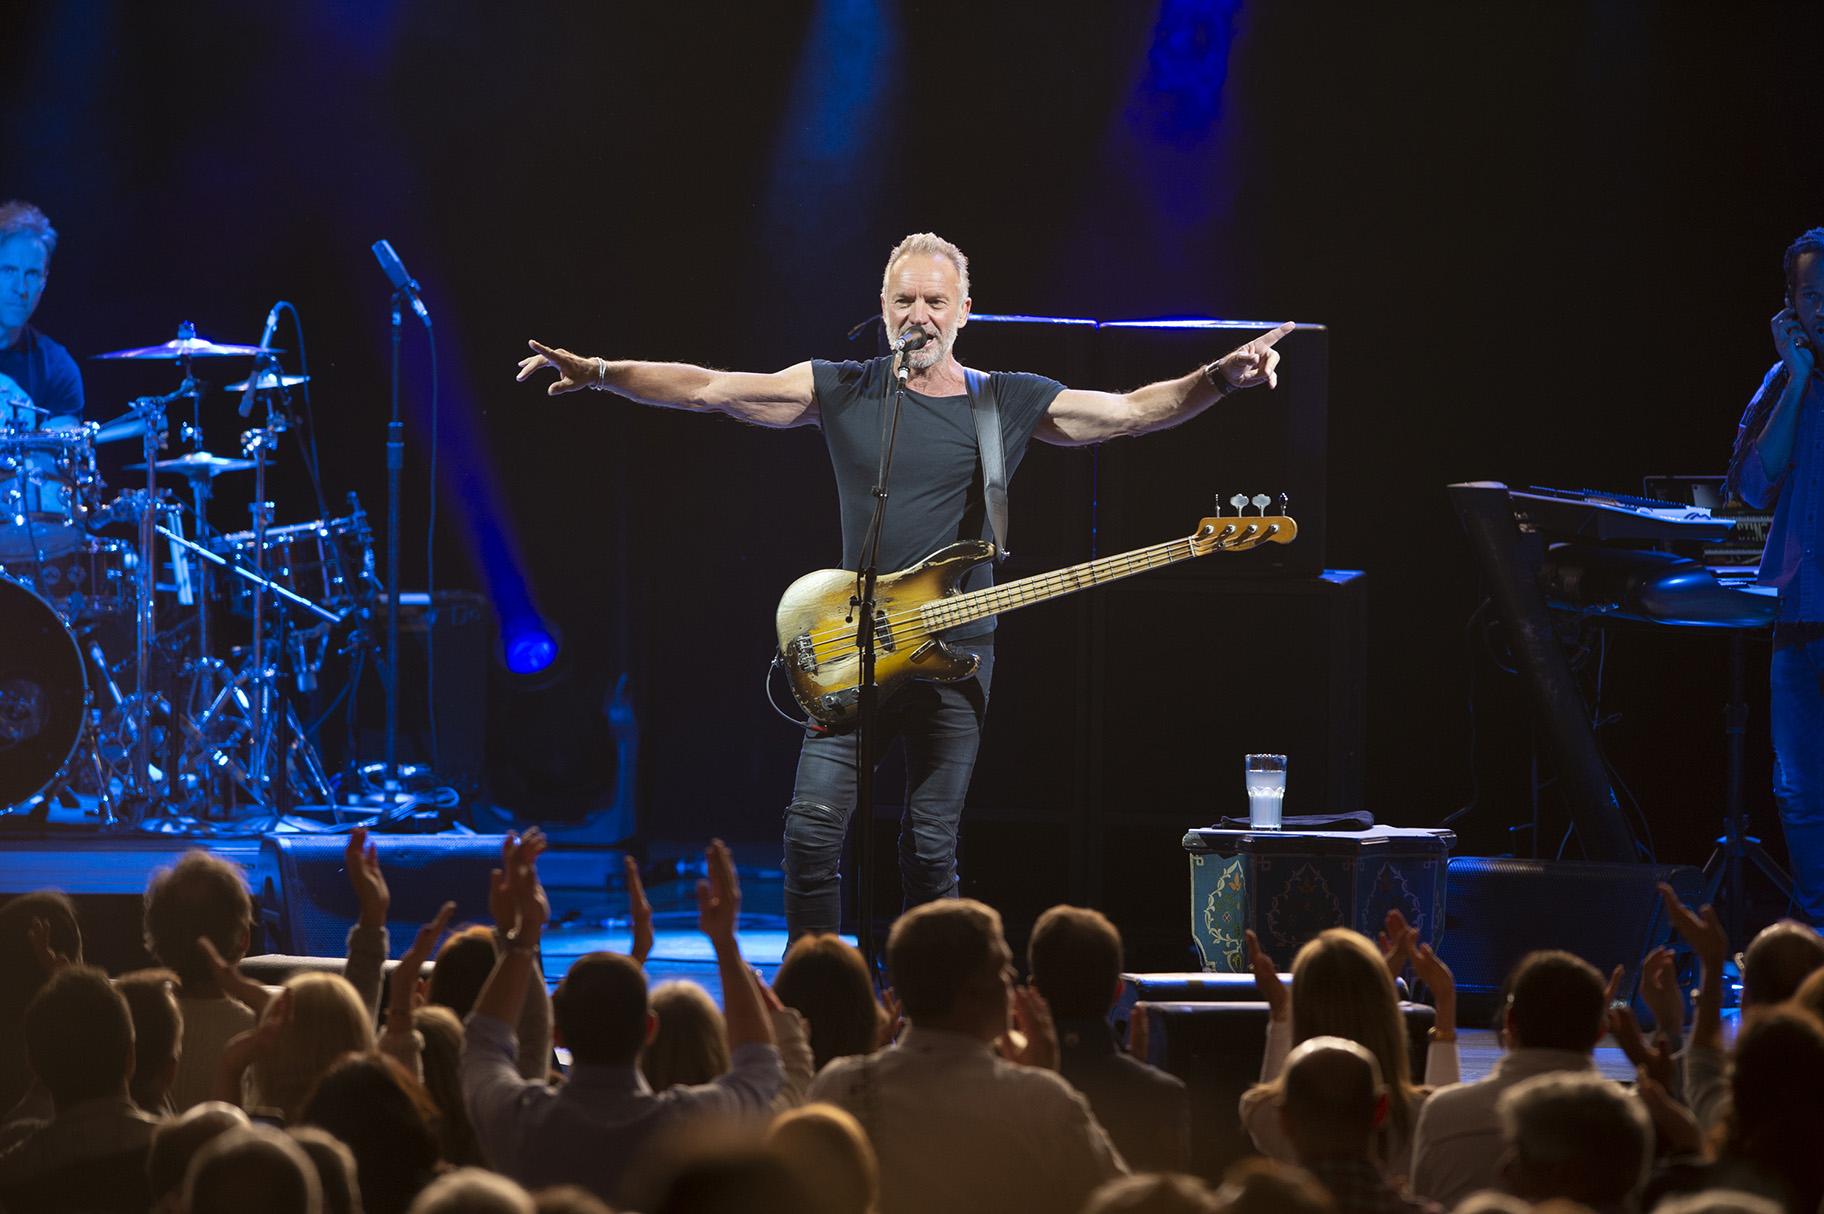 Sting performs at the Ravinia Festival Pavilion as part of his “My Songs Tour.” (Ravinia Festival / Patrick Gipson)